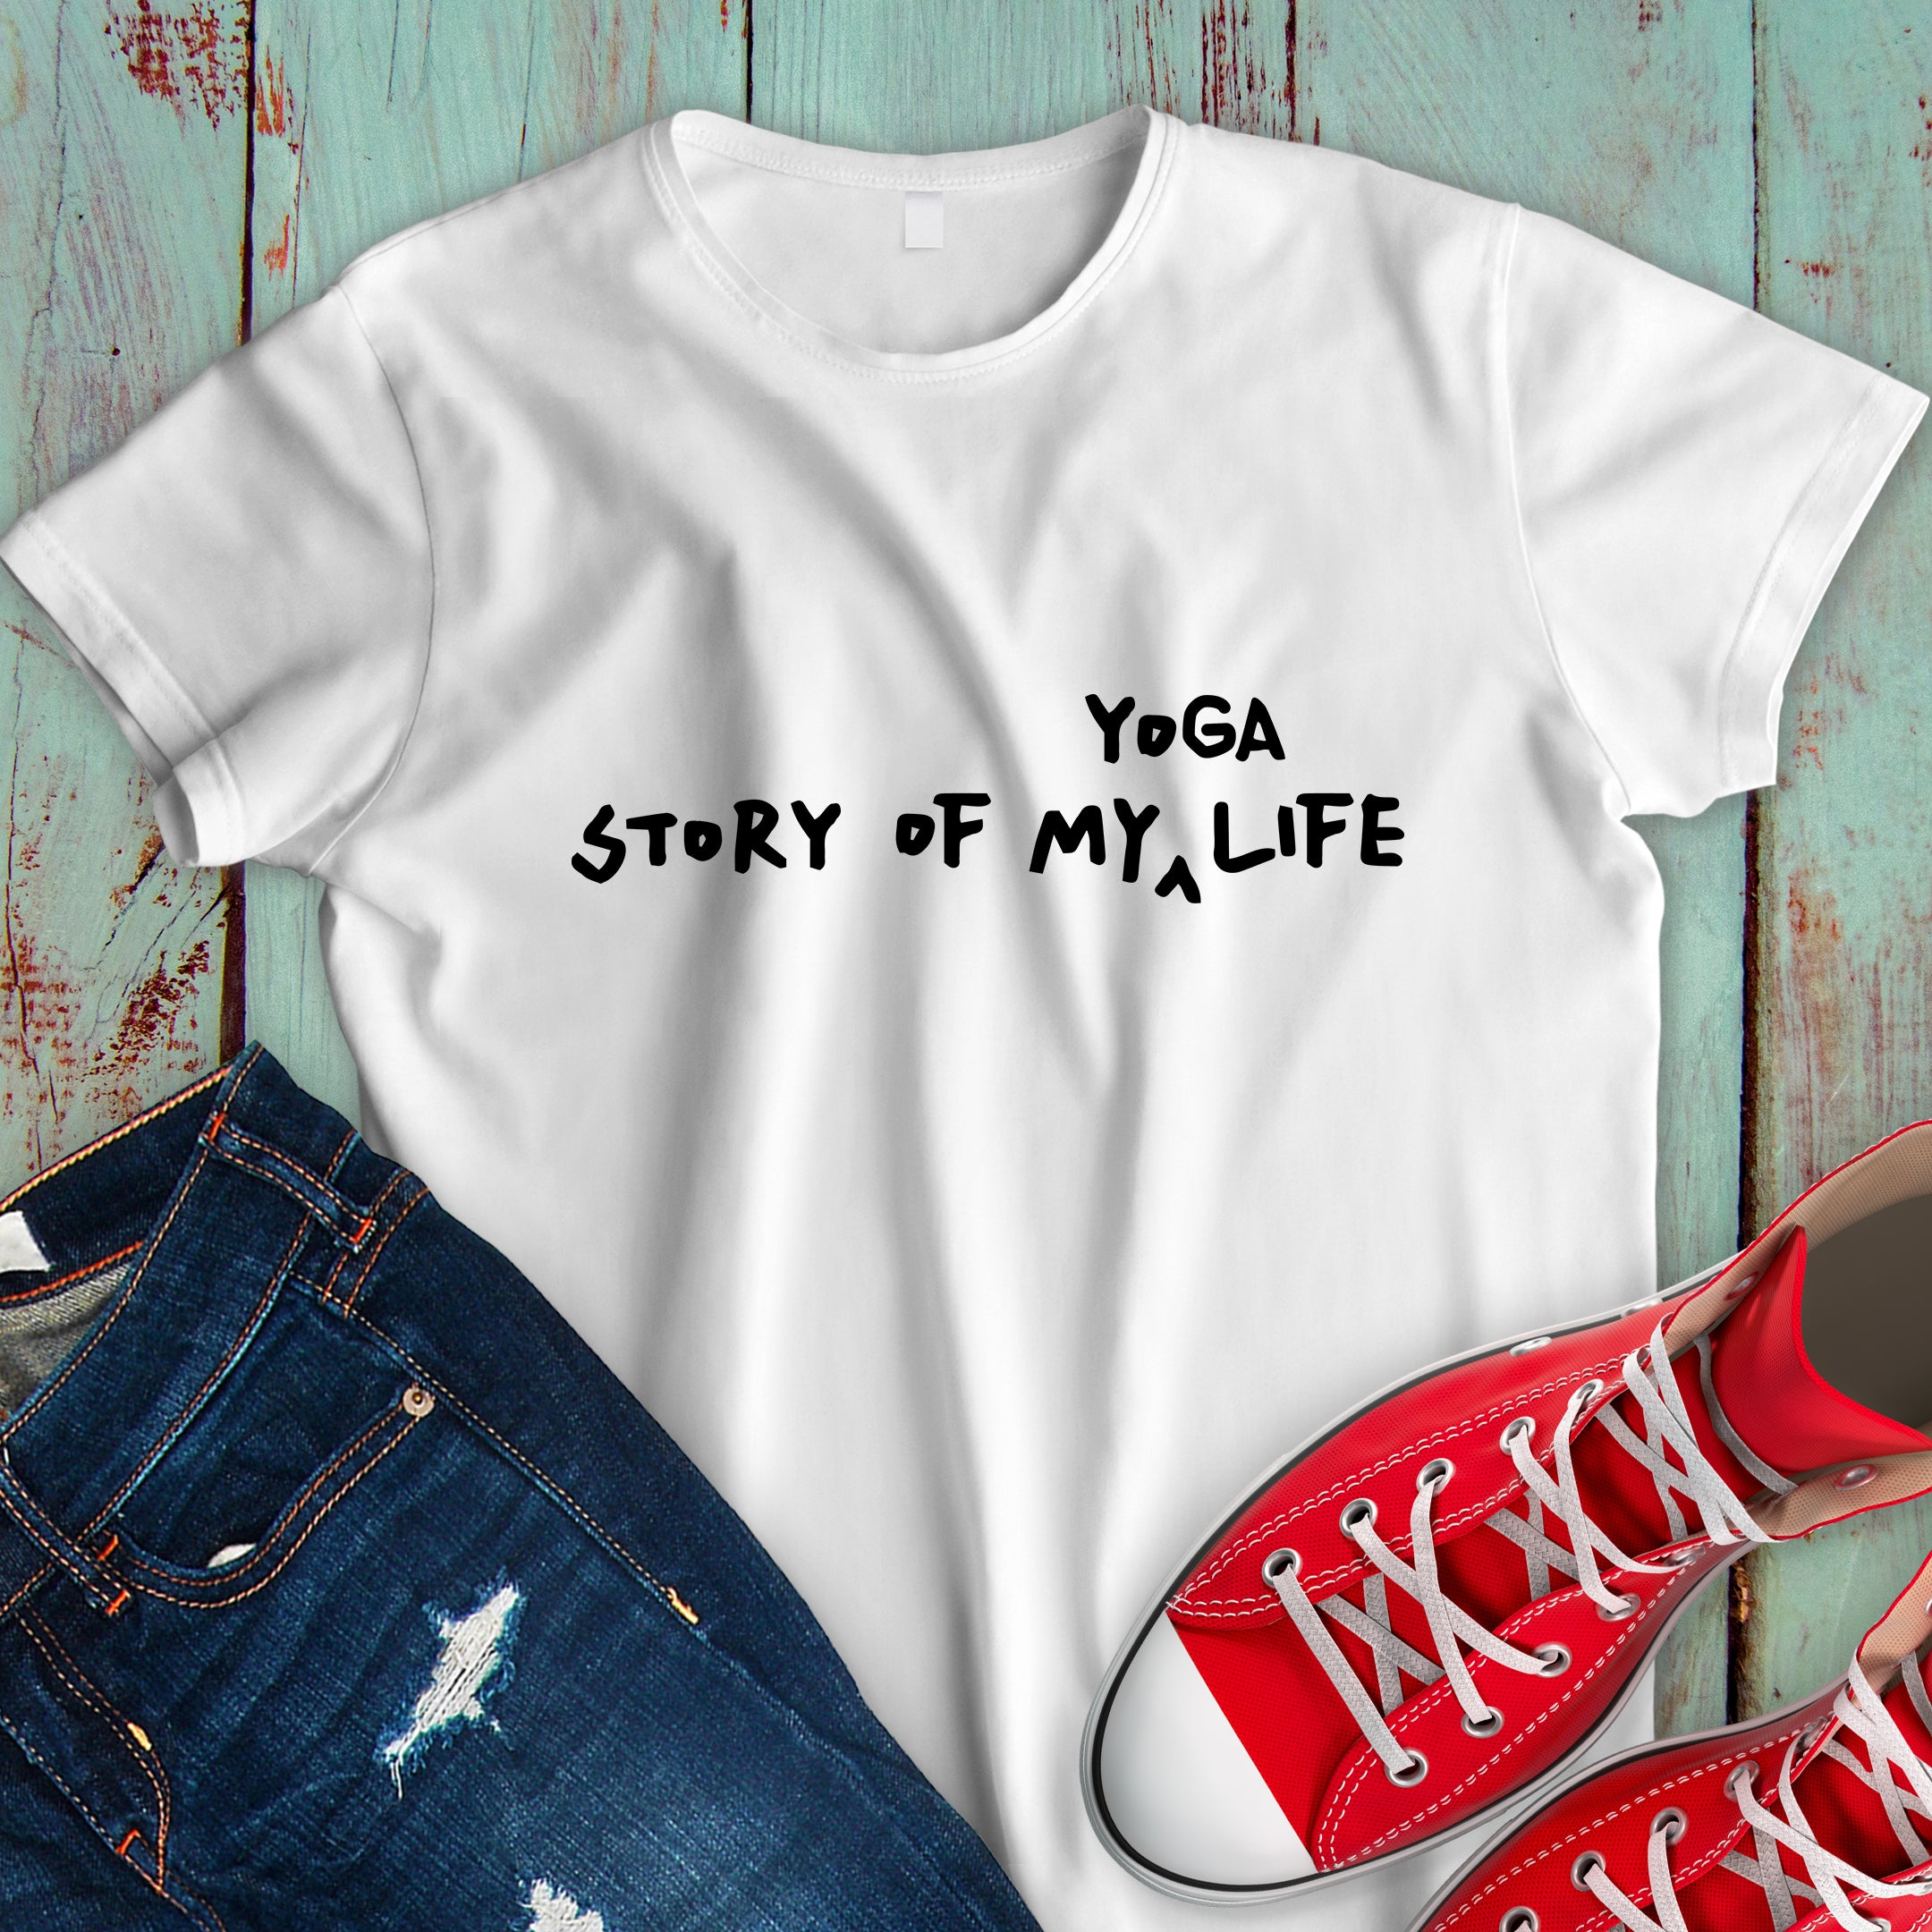 Story of my Yoga Life